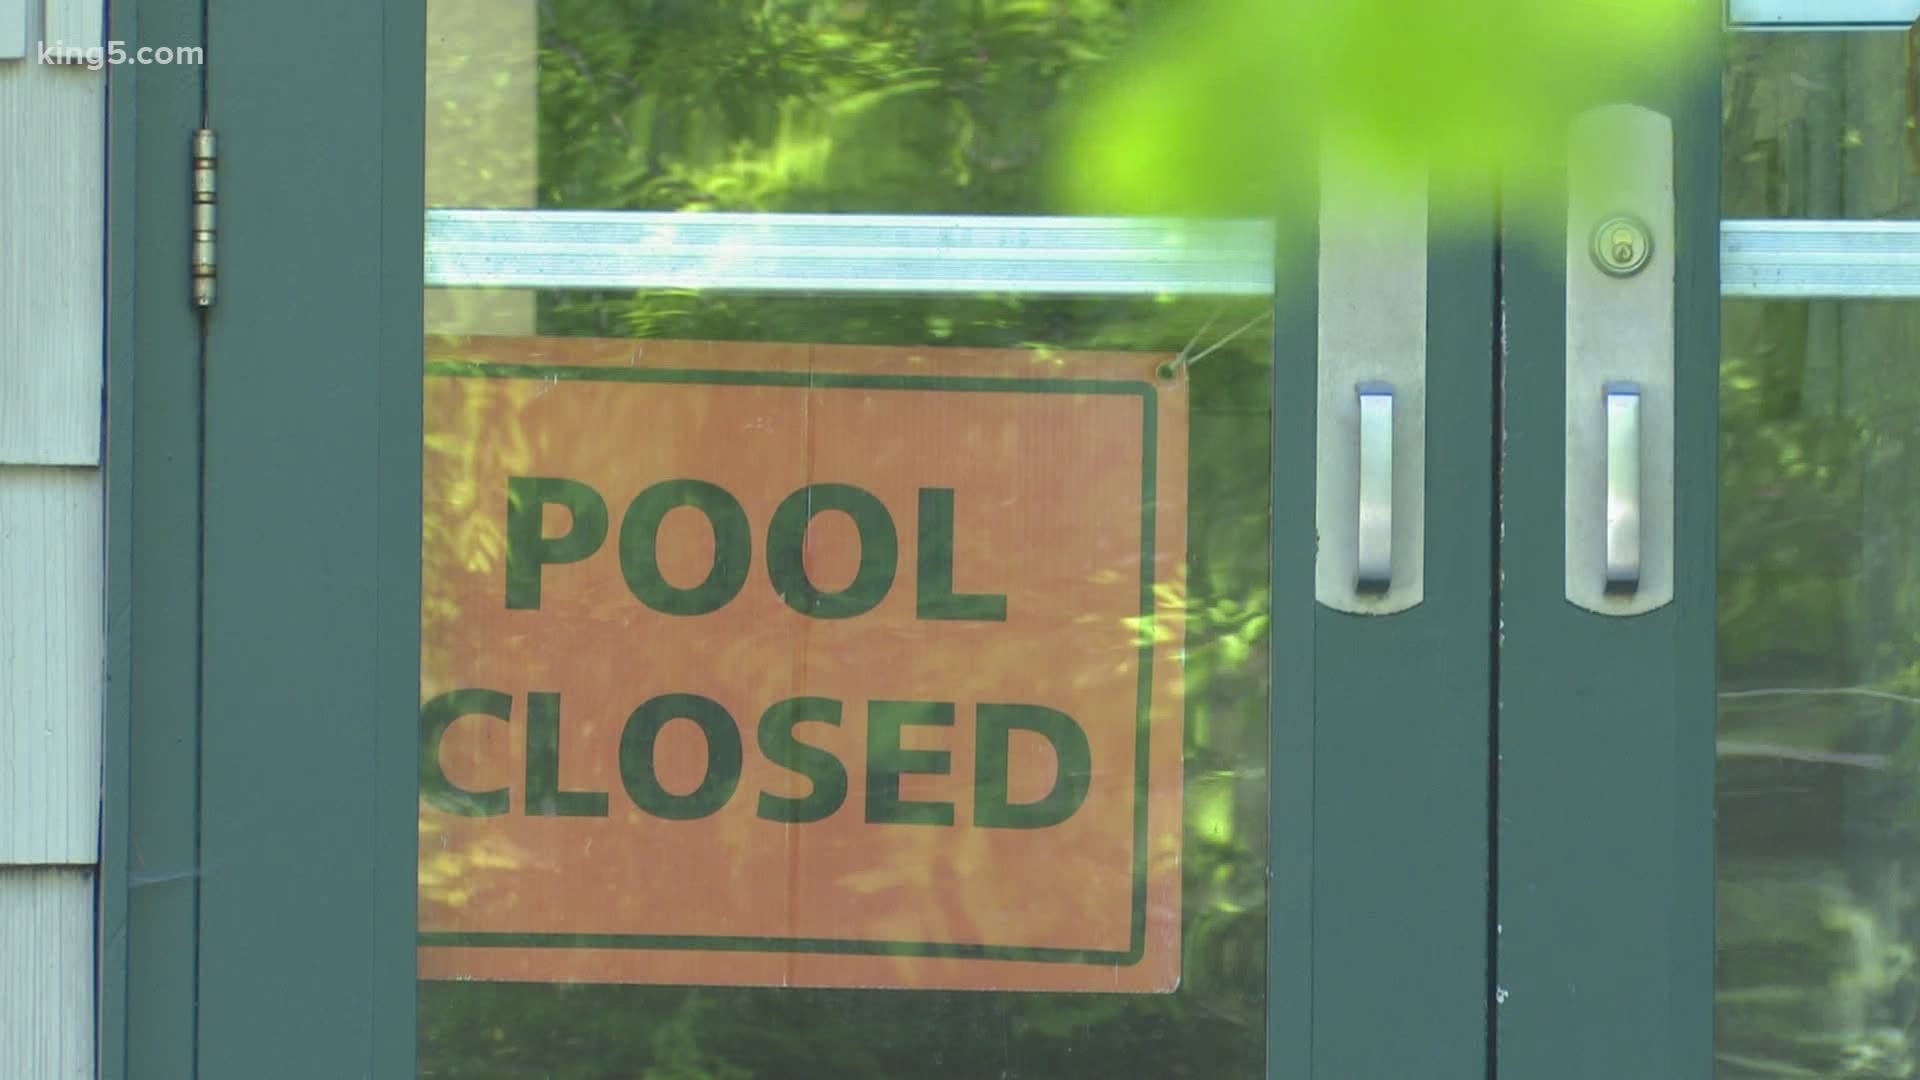 Everett has already closed the Carl Gipson Senior Center, Forest Park Swim Center, and city-sponsored events to help curb the growing budget deficit.